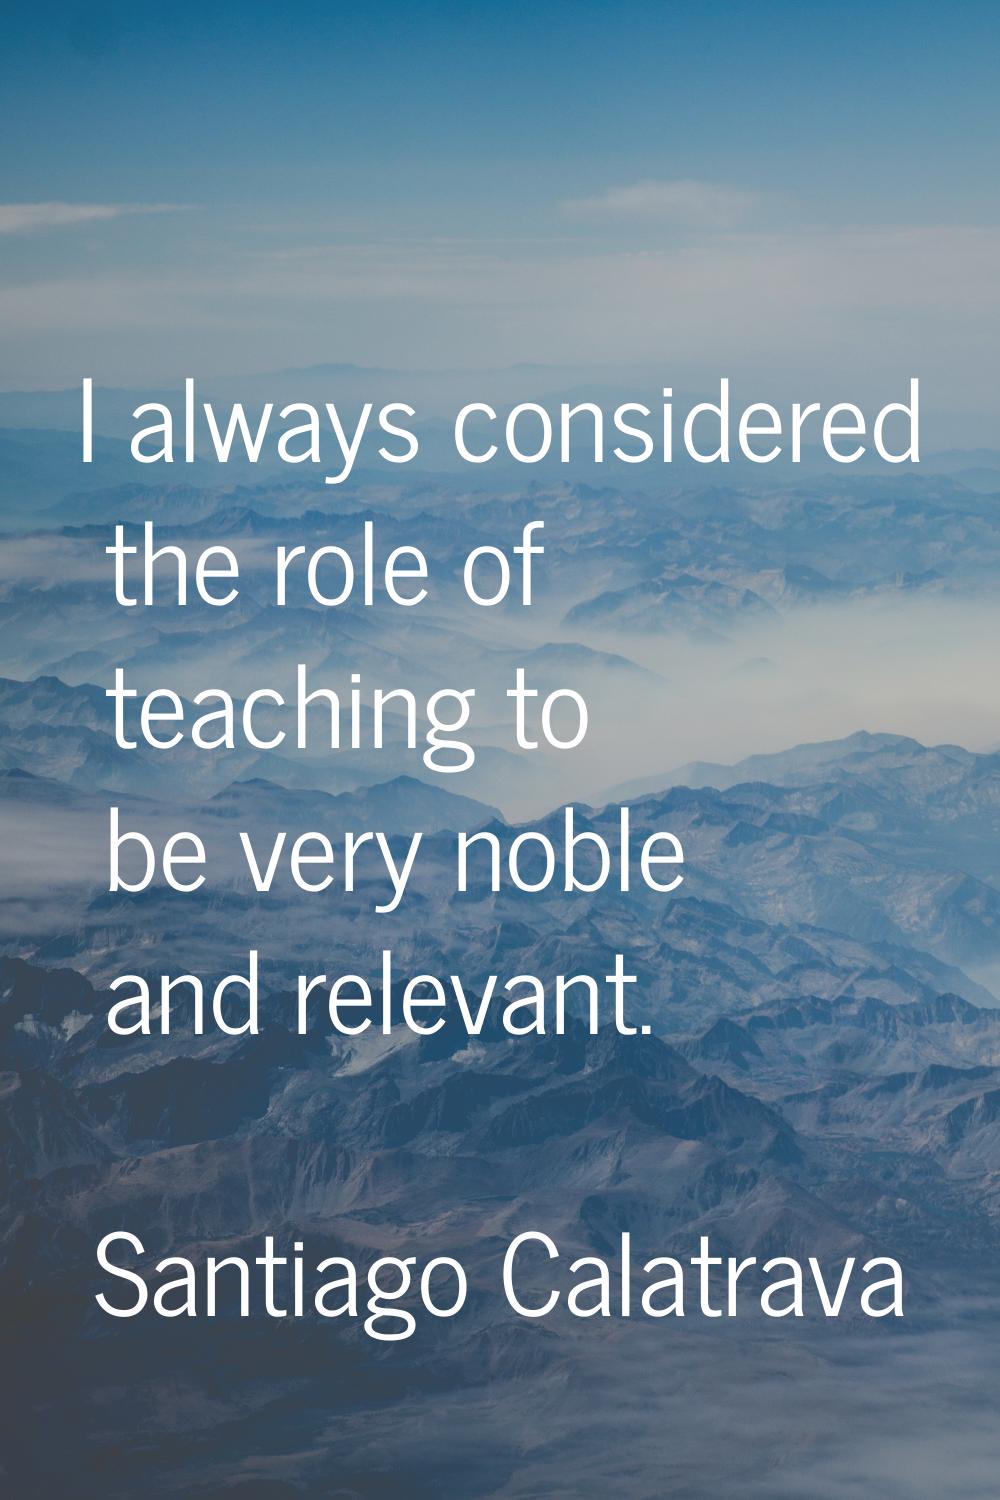 I always considered the role of teaching to be very noble and relevant.